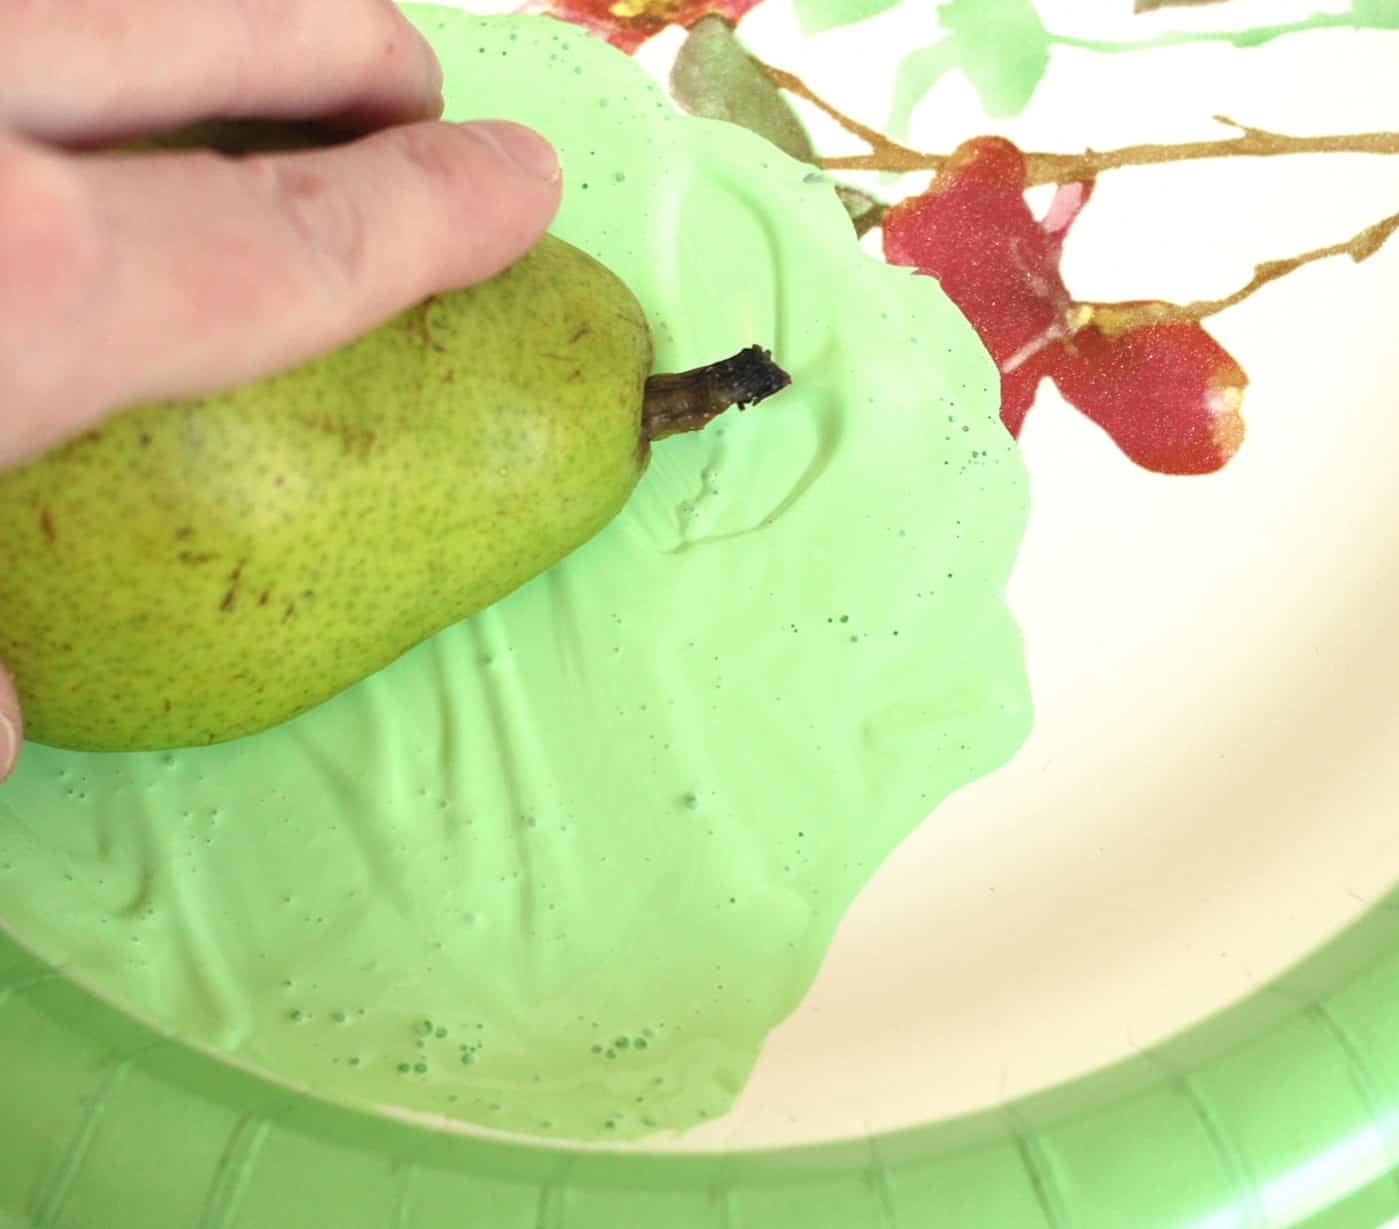 Pear fruit stamp placed into paint